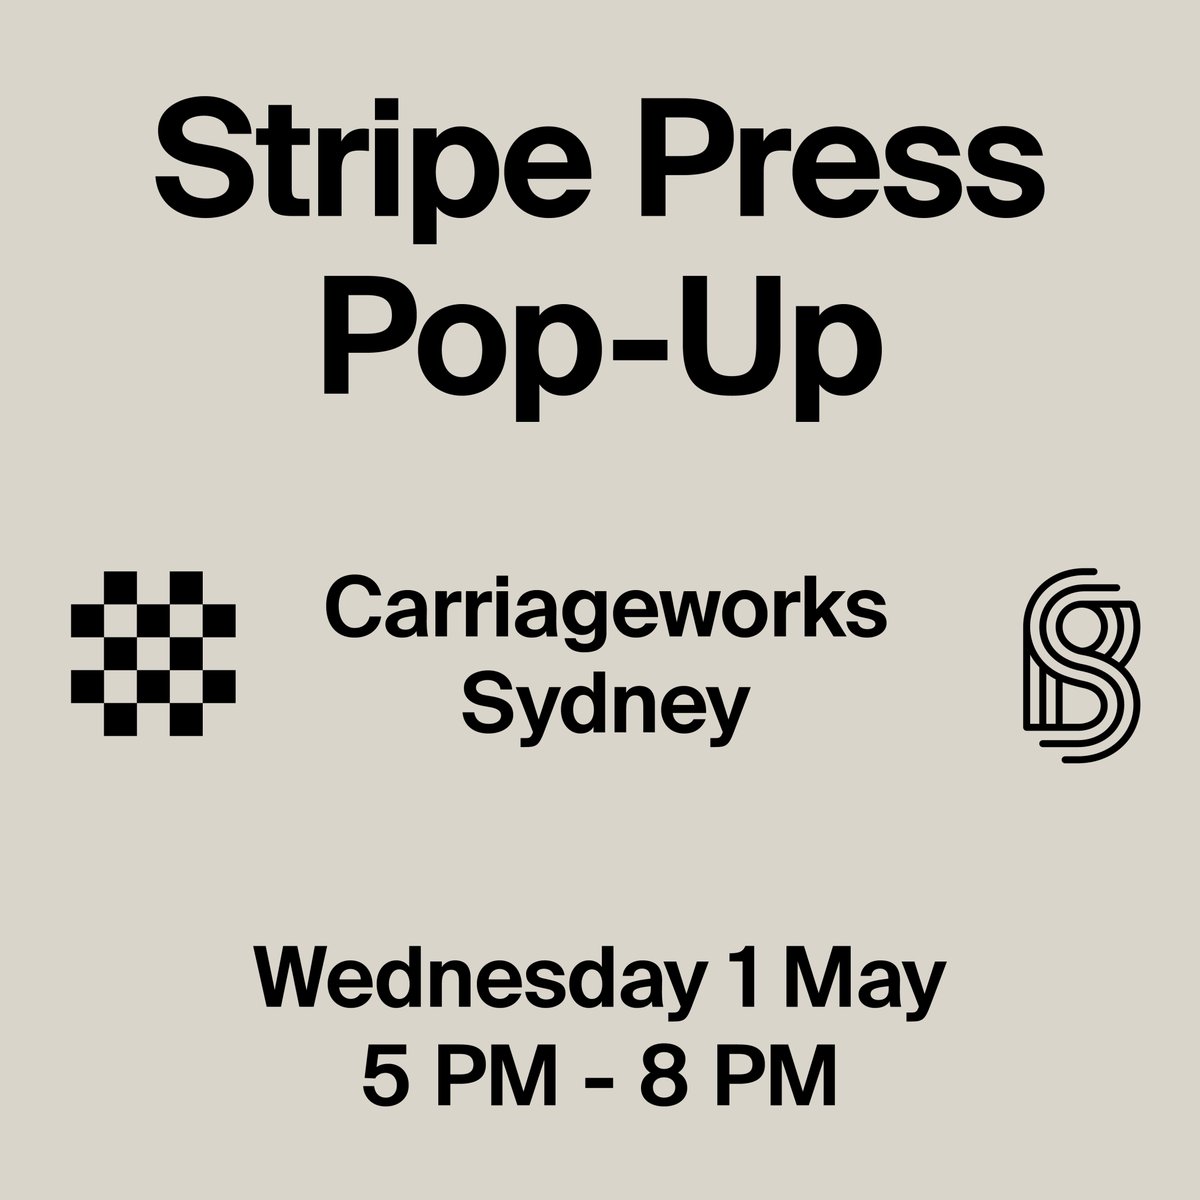 Join us in Sydney at @blackbirdvc's Moonrise for a Stripe Press pop-up! ☕📚 Stop by for coffee, snacks, and limited-edition giveaways—and, of course, the full Stripe Press catalog will be available for purchase. RSVP: lu.ma/stripe-press-s…